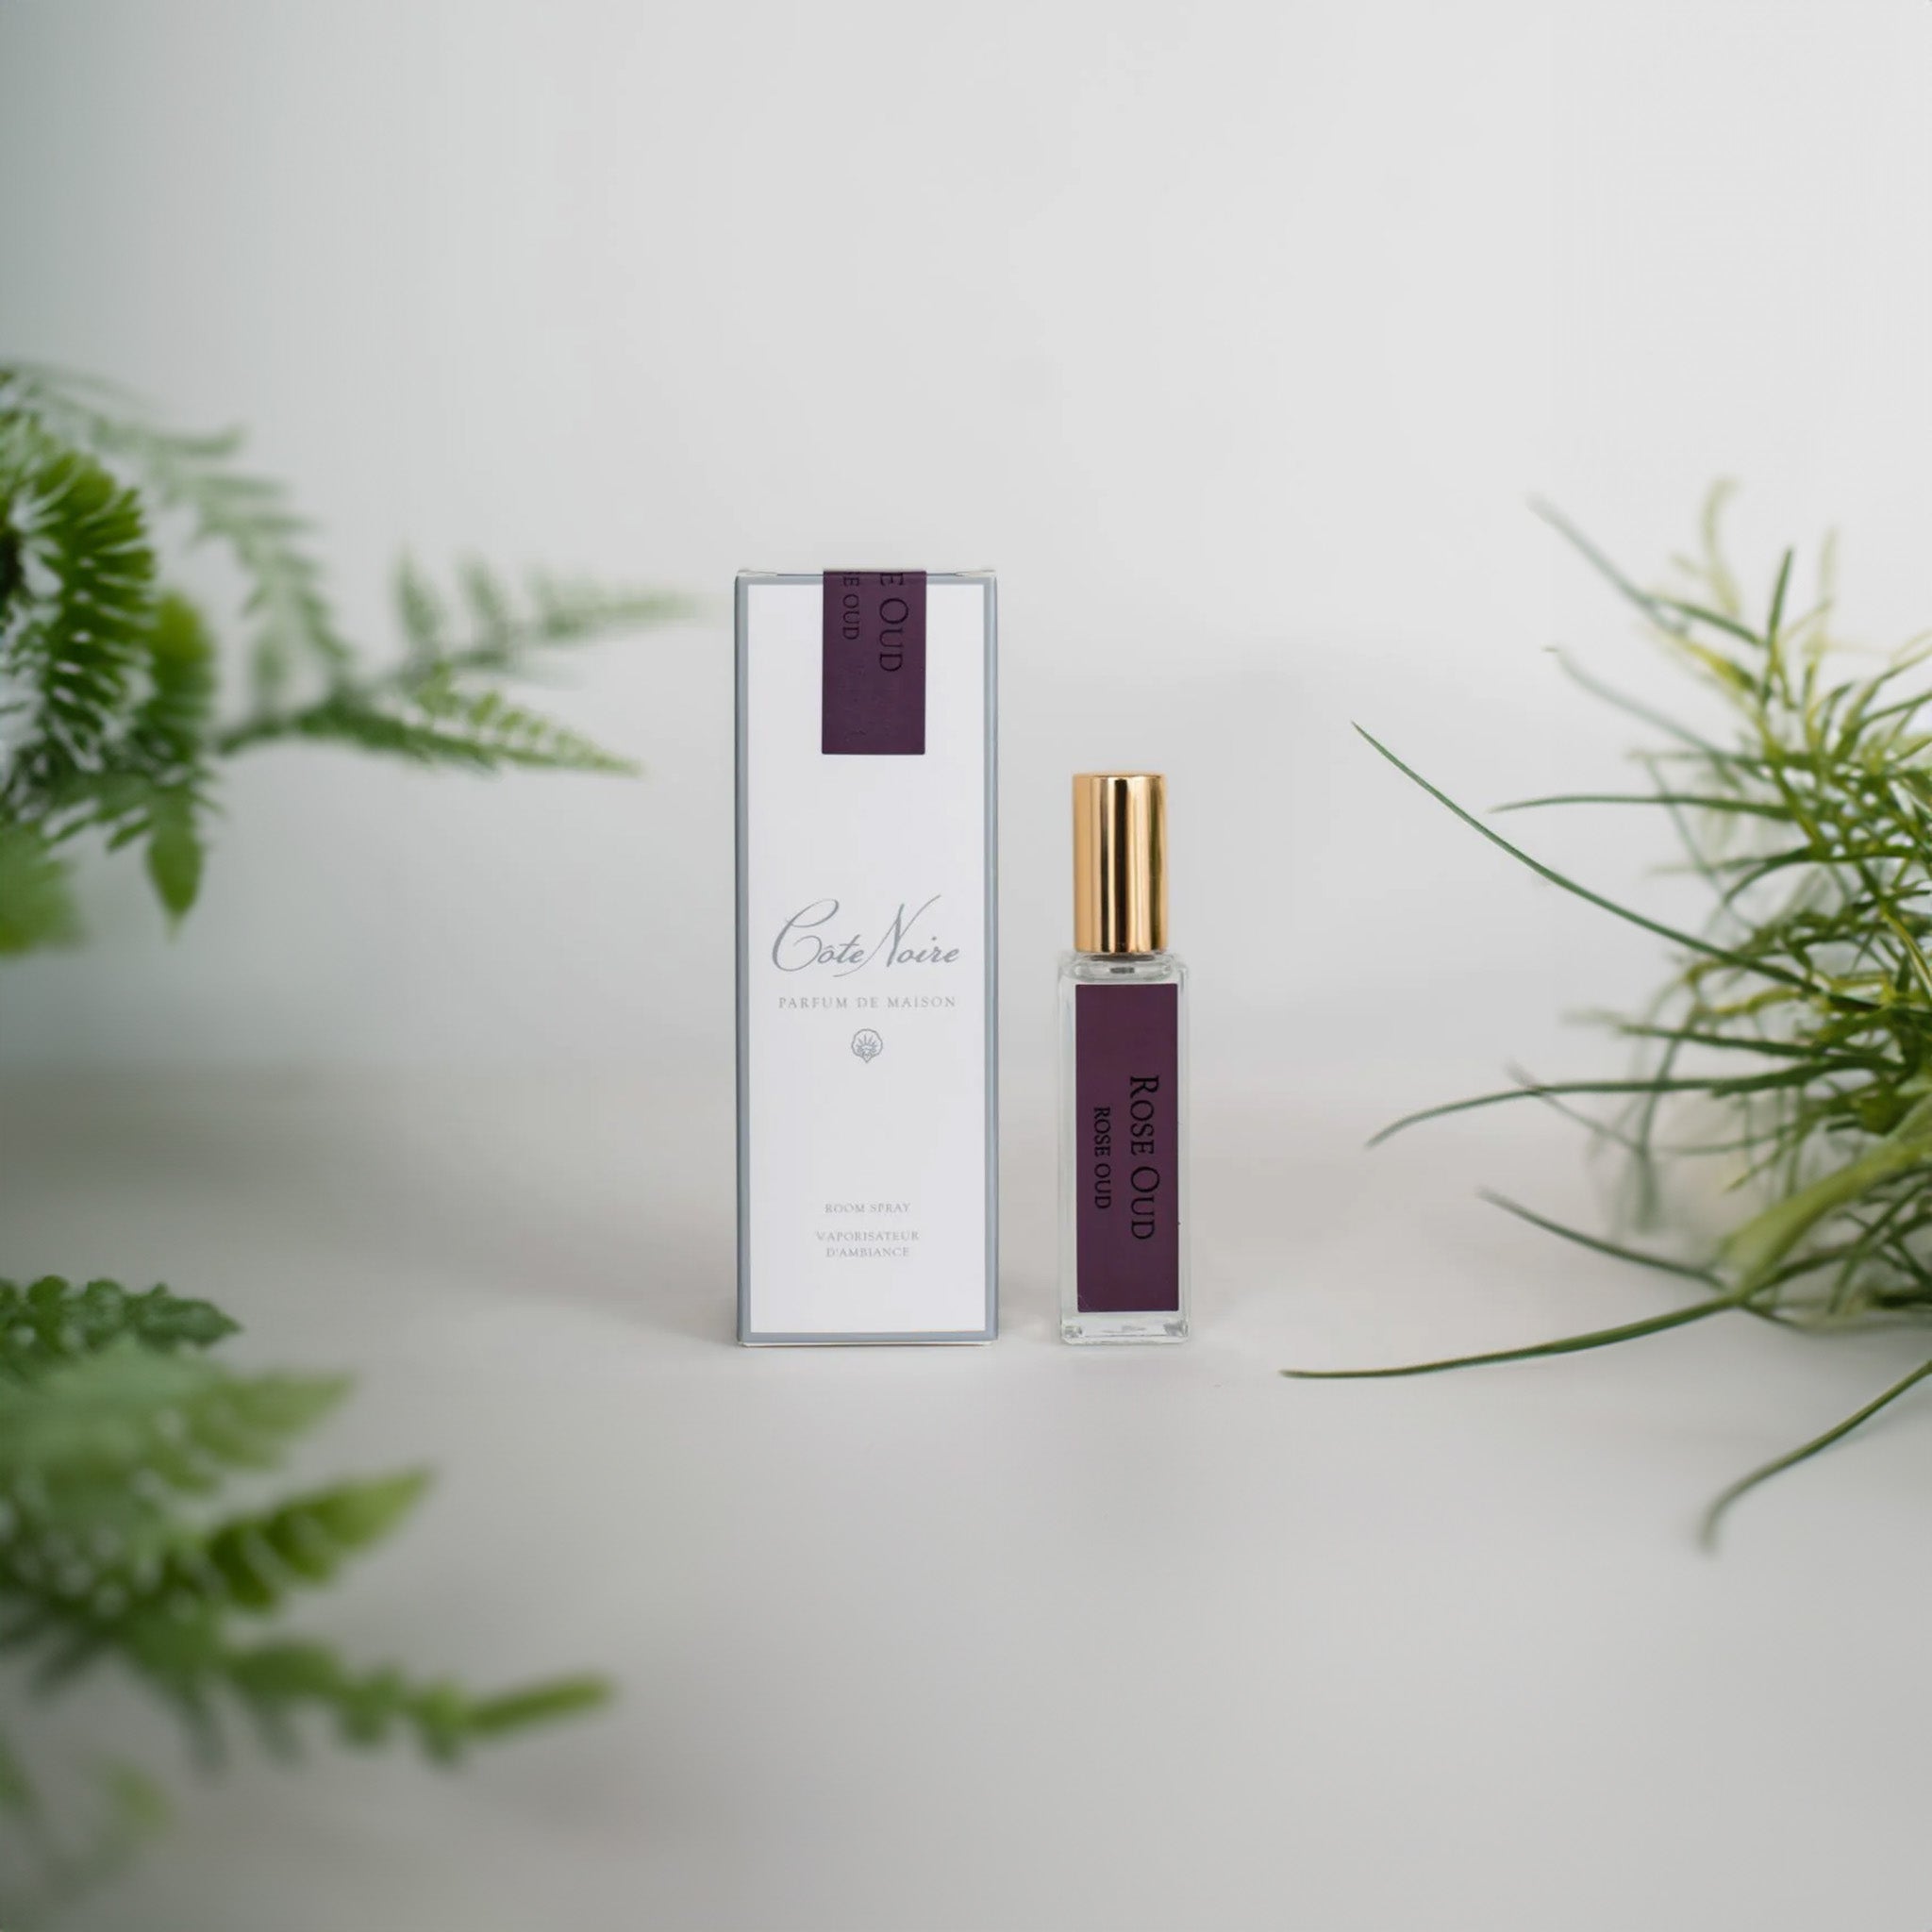 Côte Noire Rose Oud room spray and packaging box displayed on a white surface, surrounded by a soft blur of green ferns, emphasizing the product's natural and sophisticated essence.